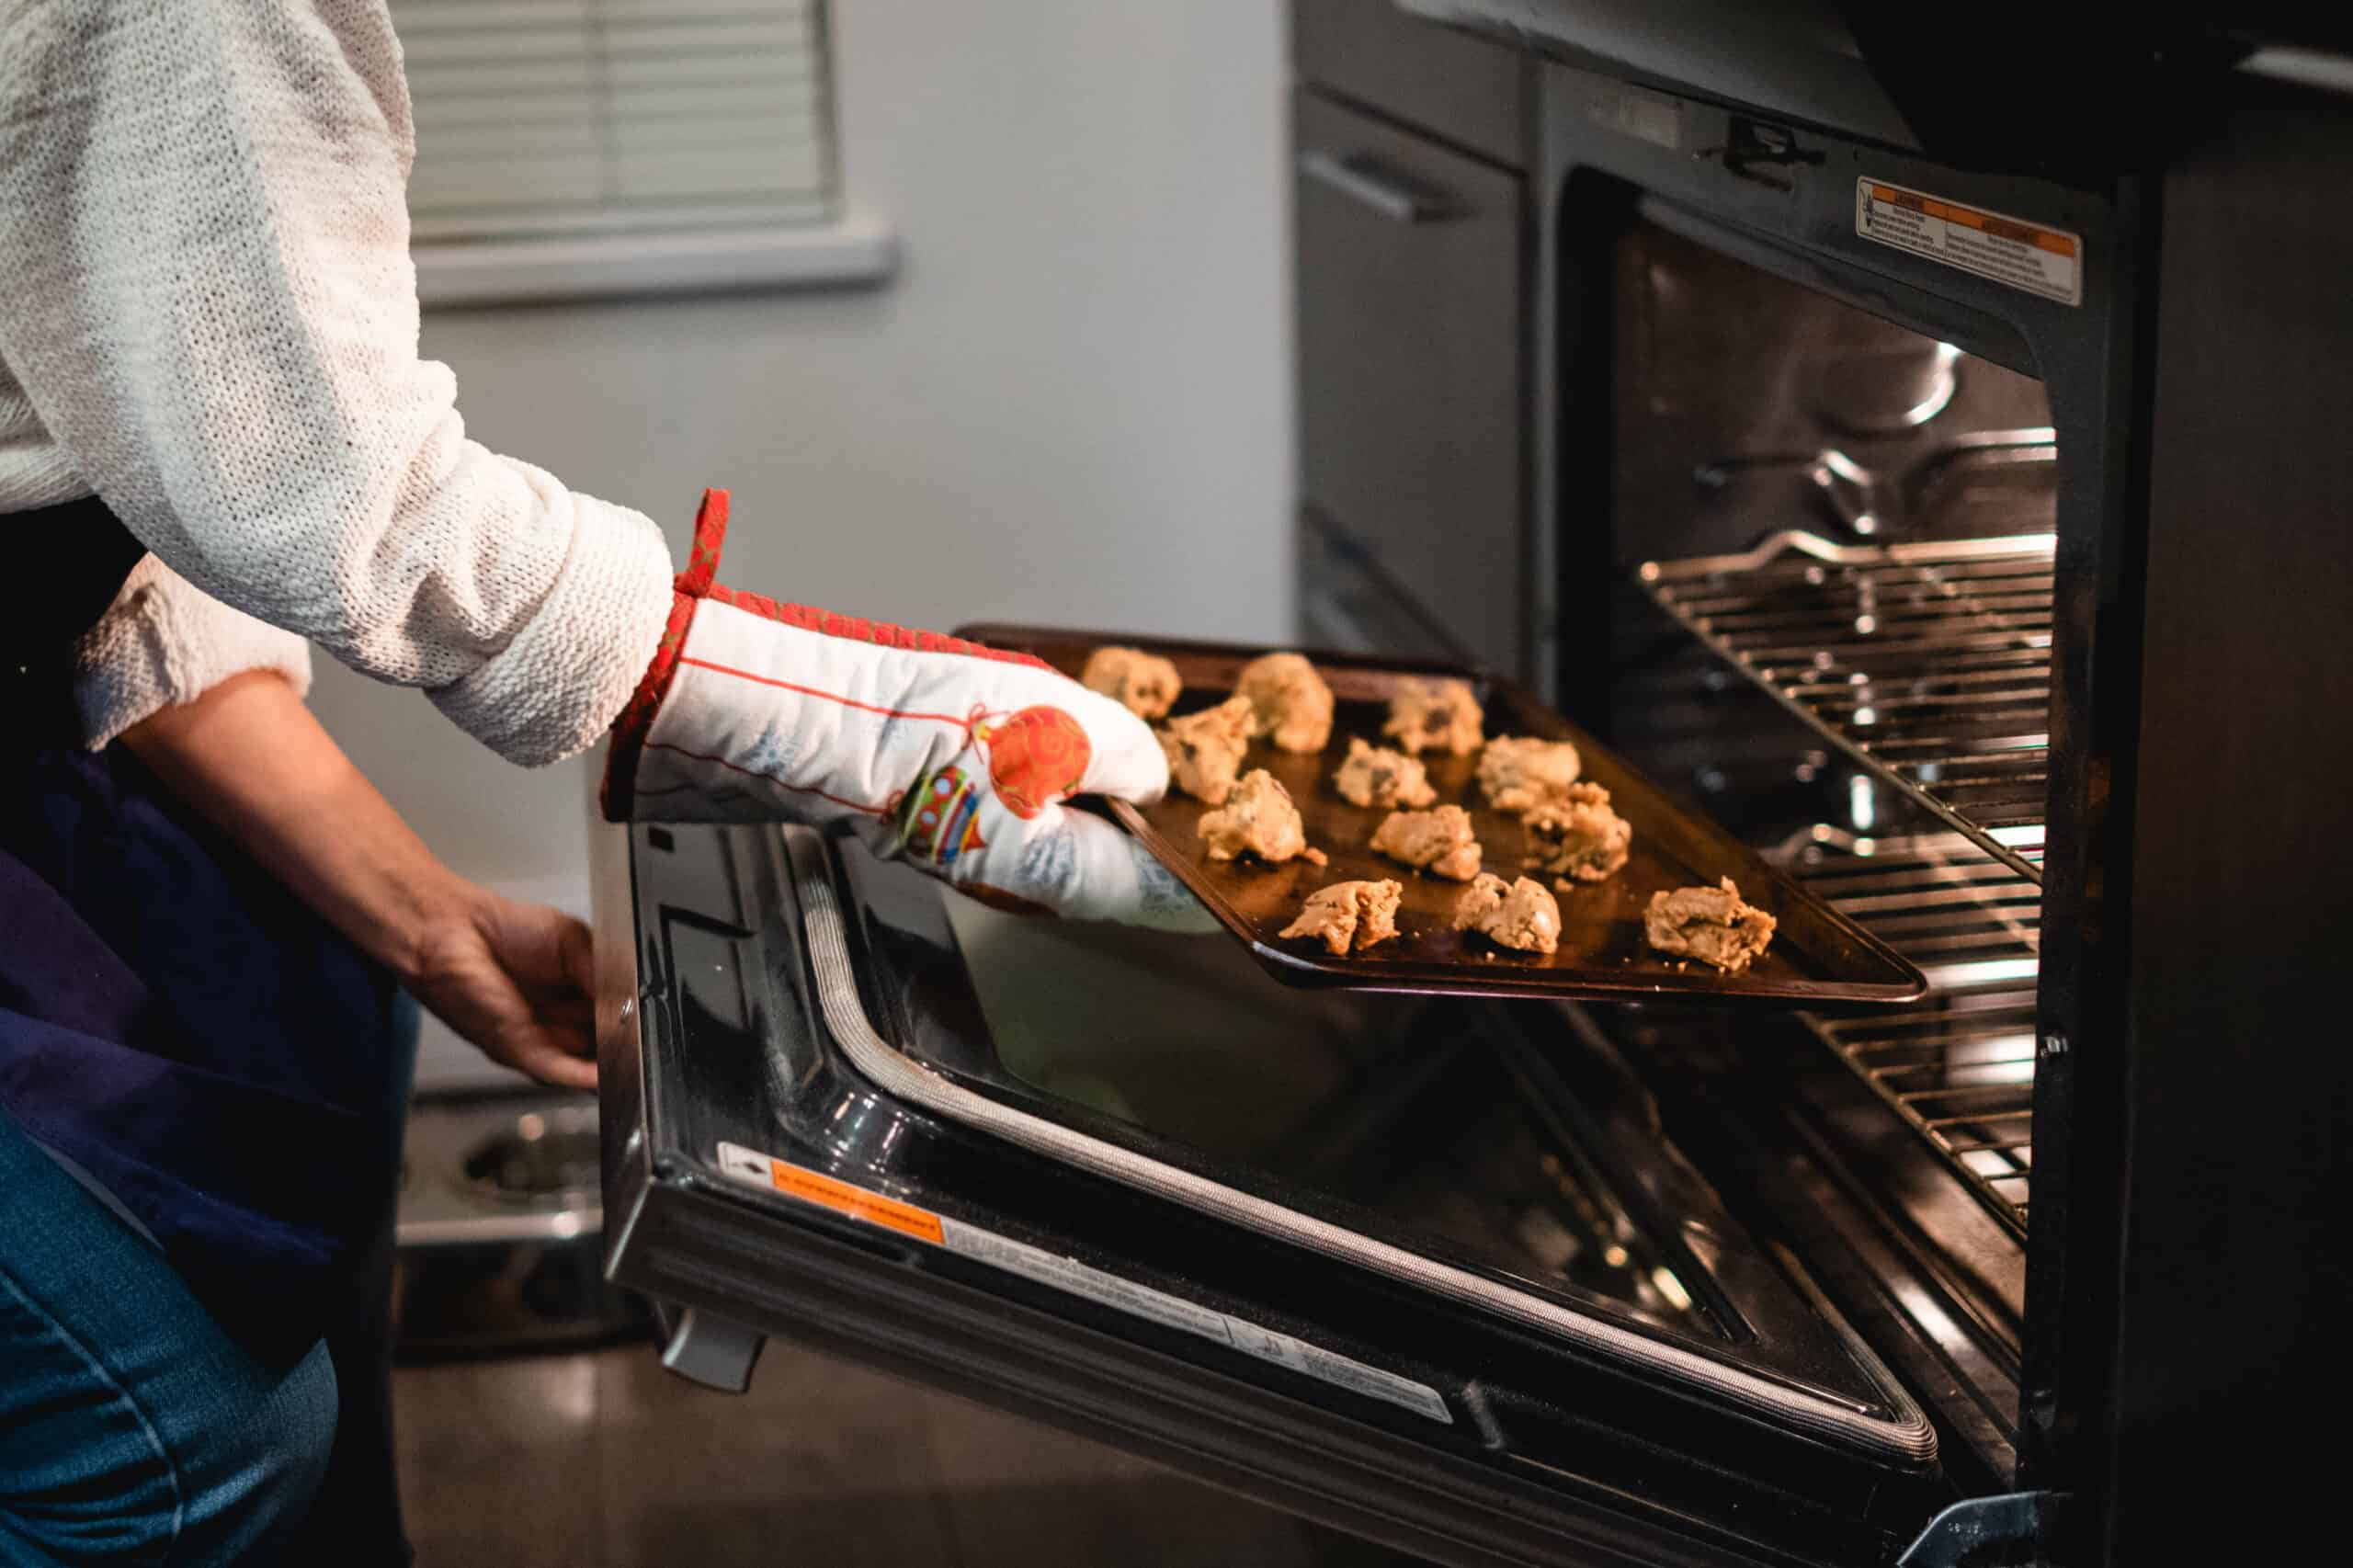 Non-Toxic Oven Cleaning: How to Clean Ovens & Stove Tops